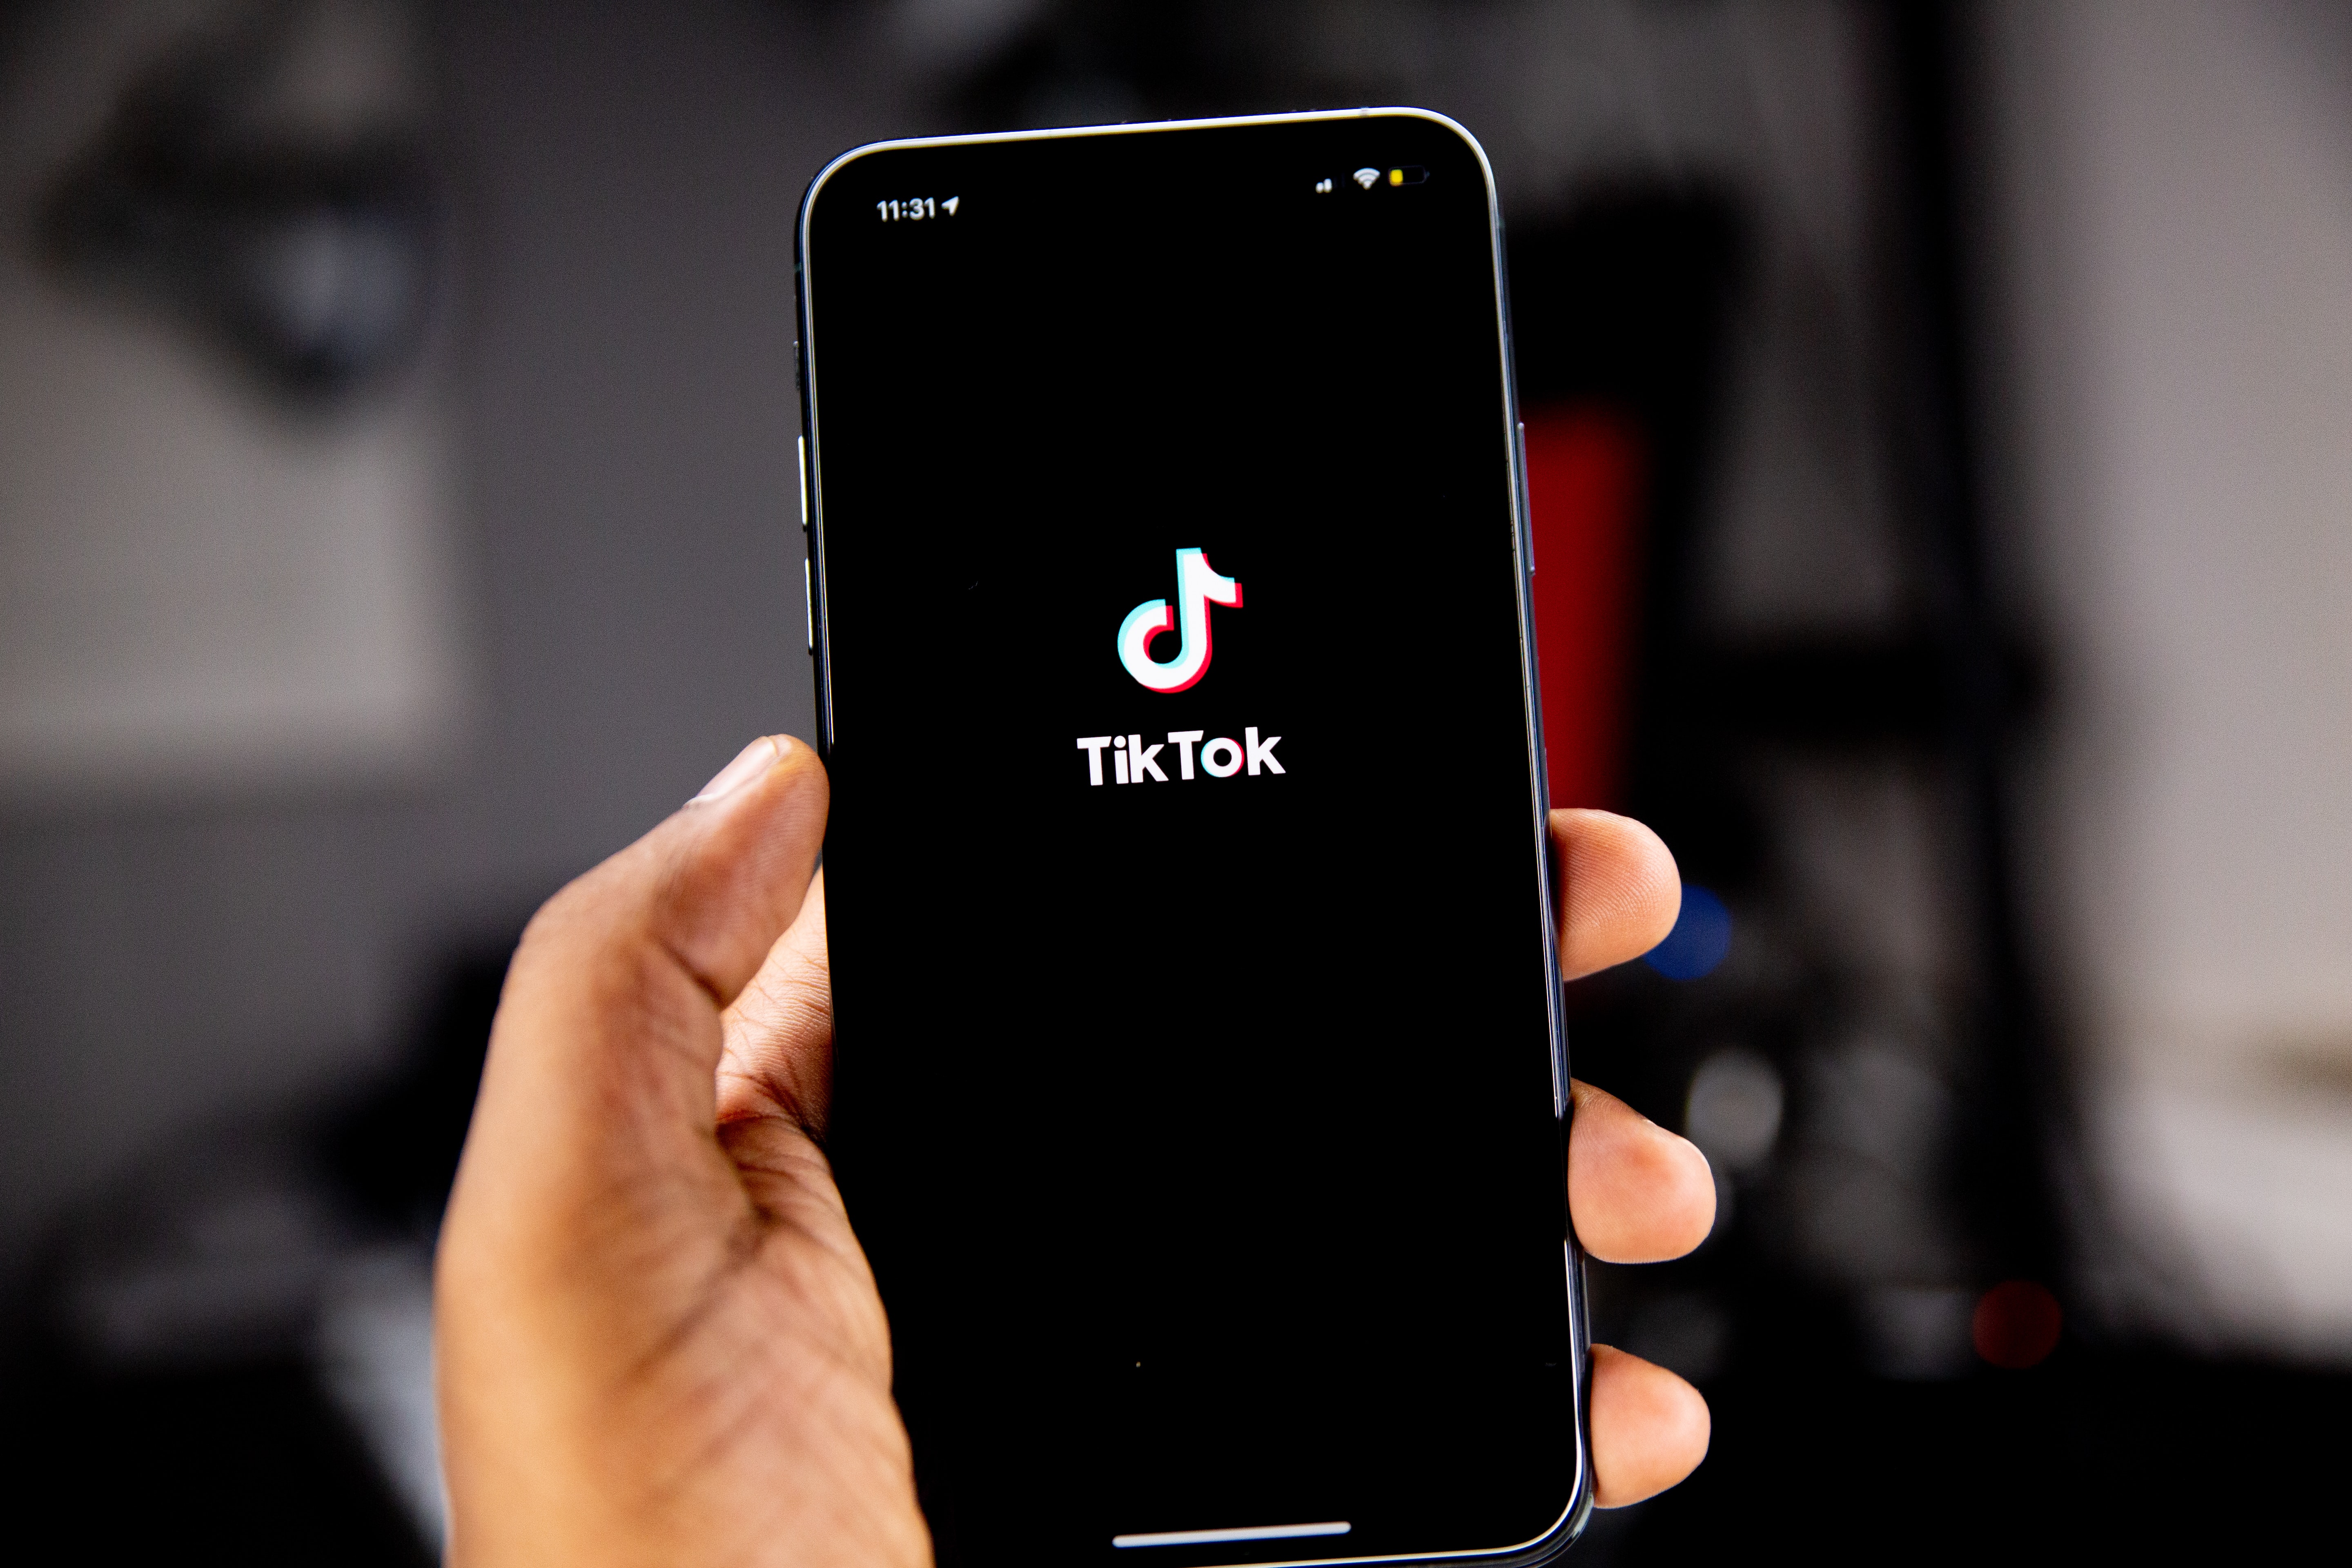 How TikTok Ban Is Related To USA Rare Earth Security Issues